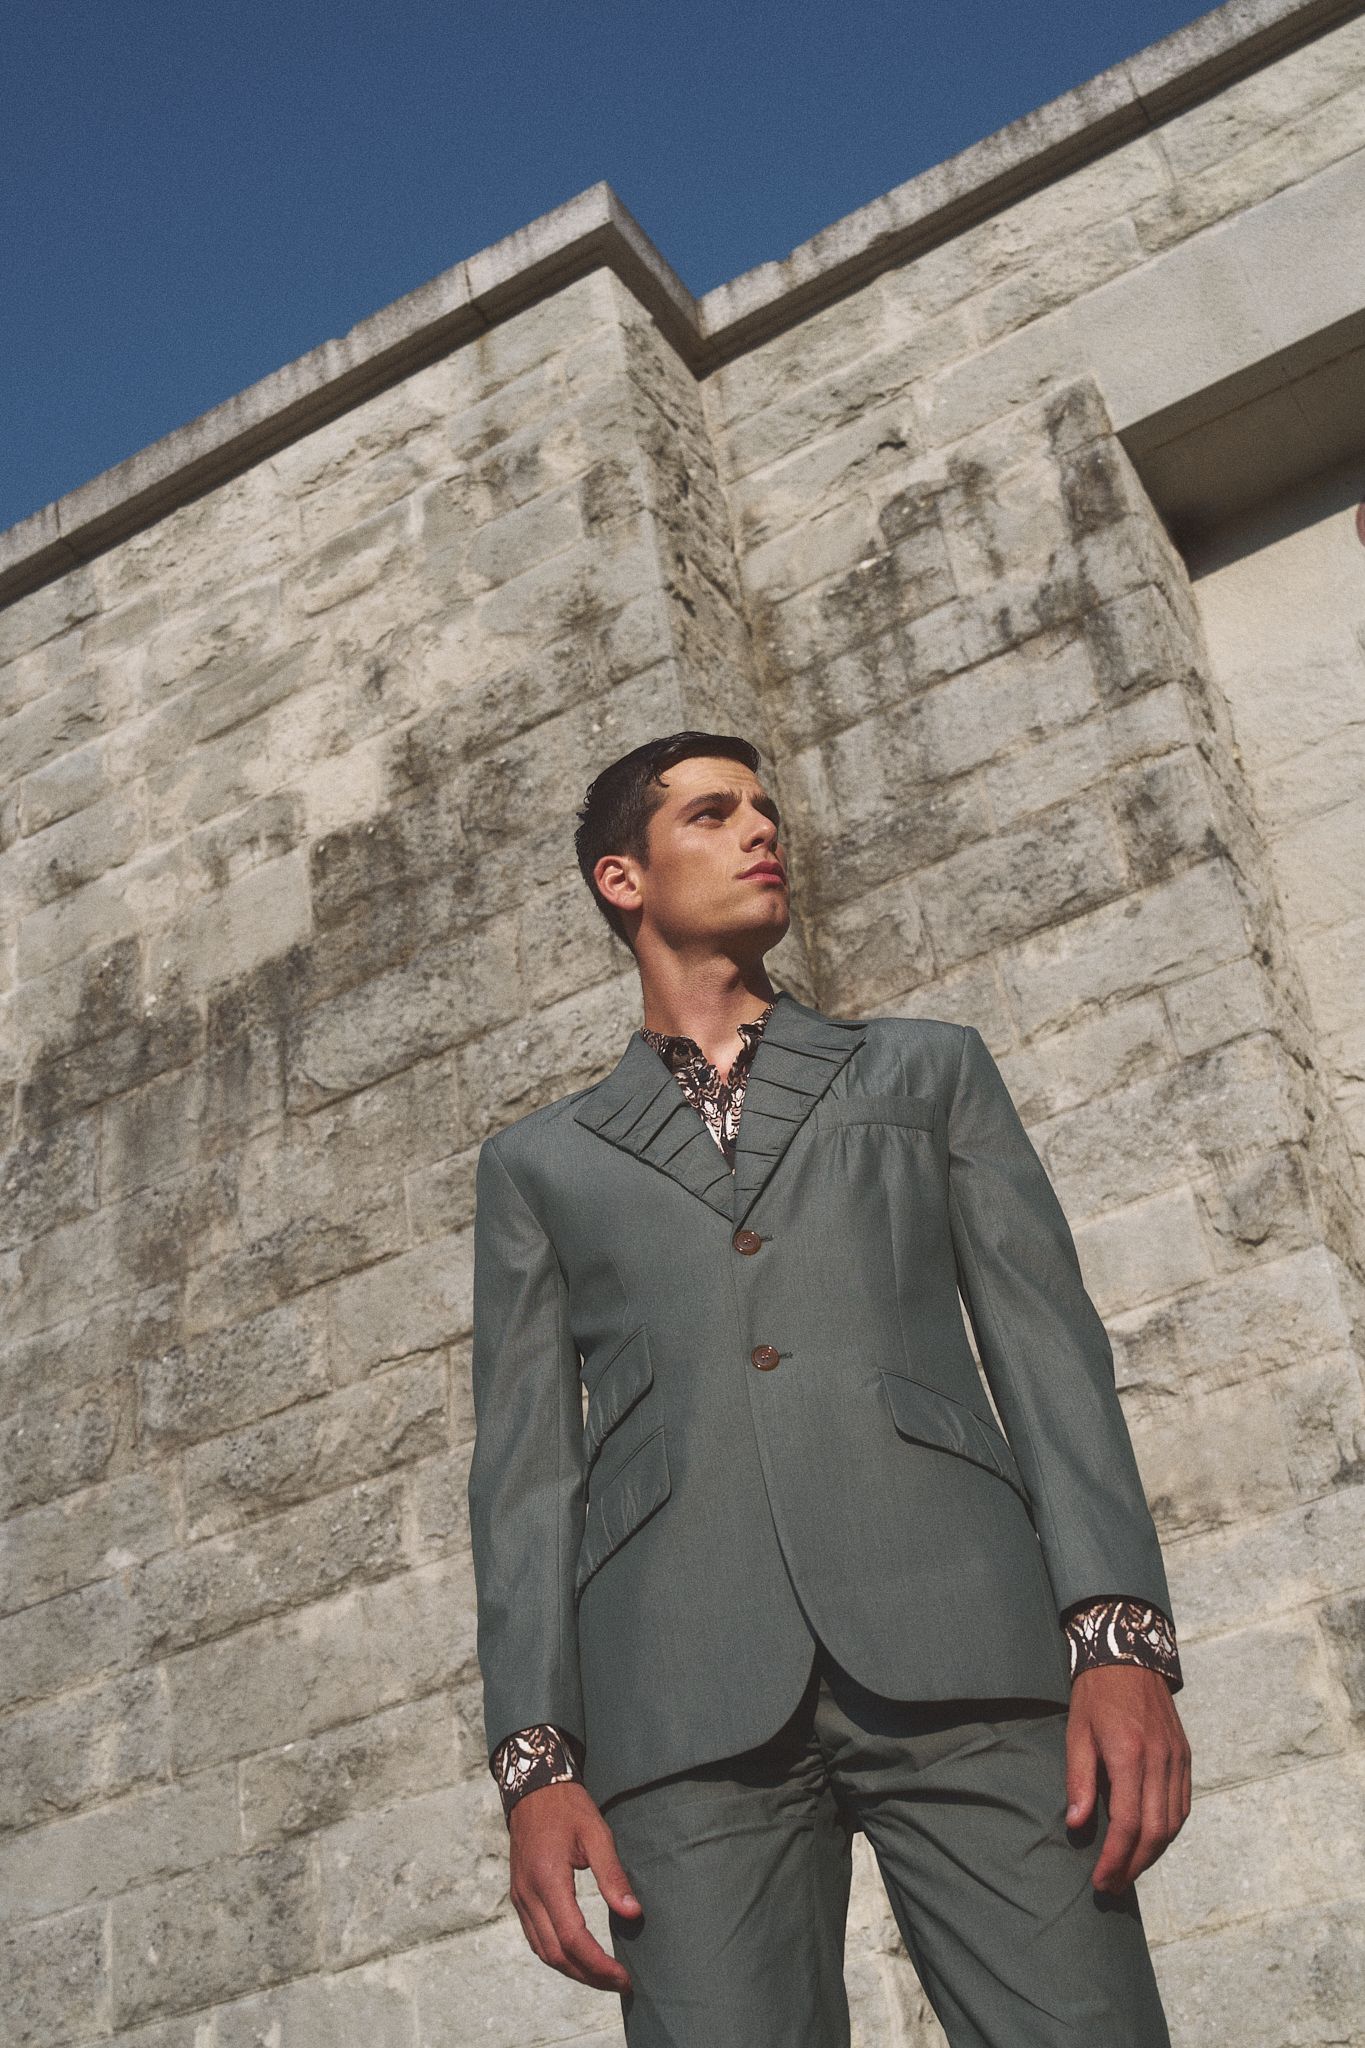 Stone and Wool- Spaghettimag editorial - Pic. 5